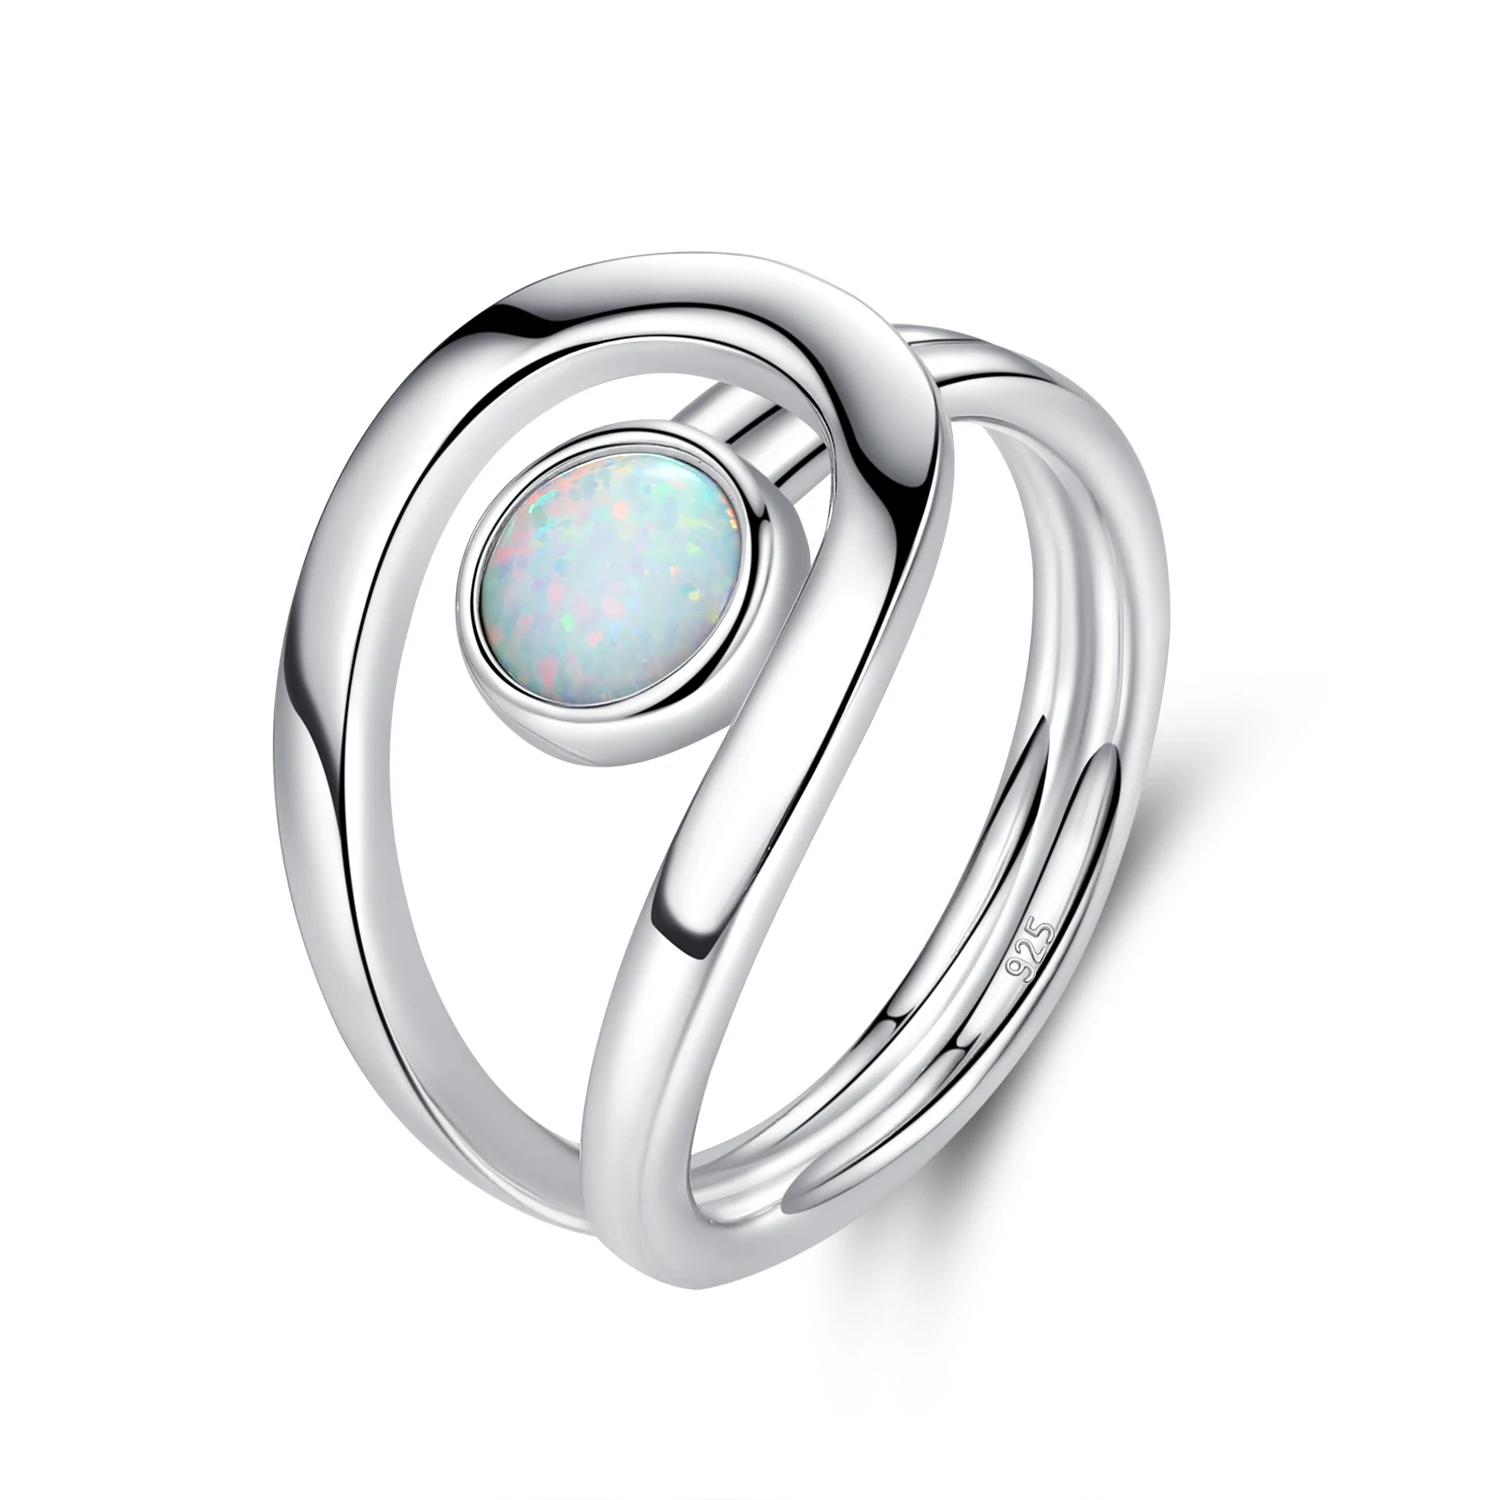 

KALETINE Unique Design 925 Sterling Silver Rings Gorgeous Halo Opal Women Wedding Engagement Anniversary Jewelry